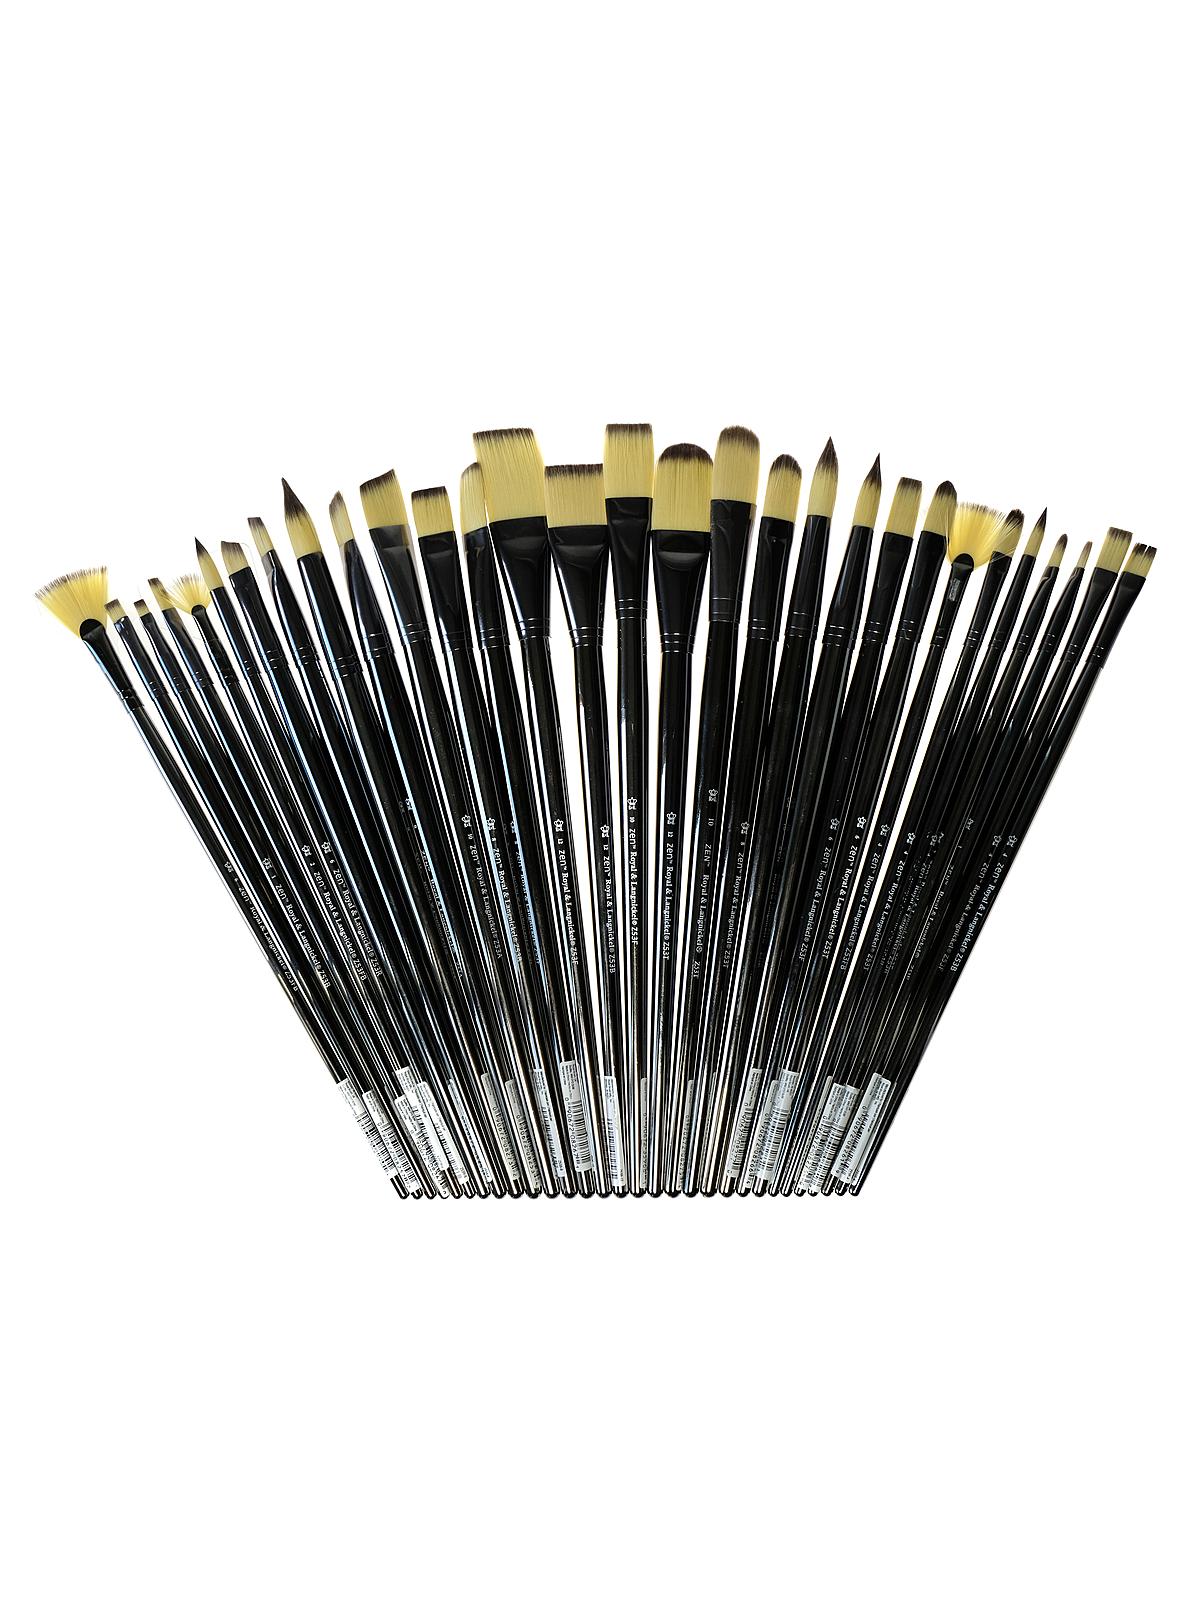 Royal & Langnickel Zen Series 53 Synthetic Acrylic & Oil Brushes